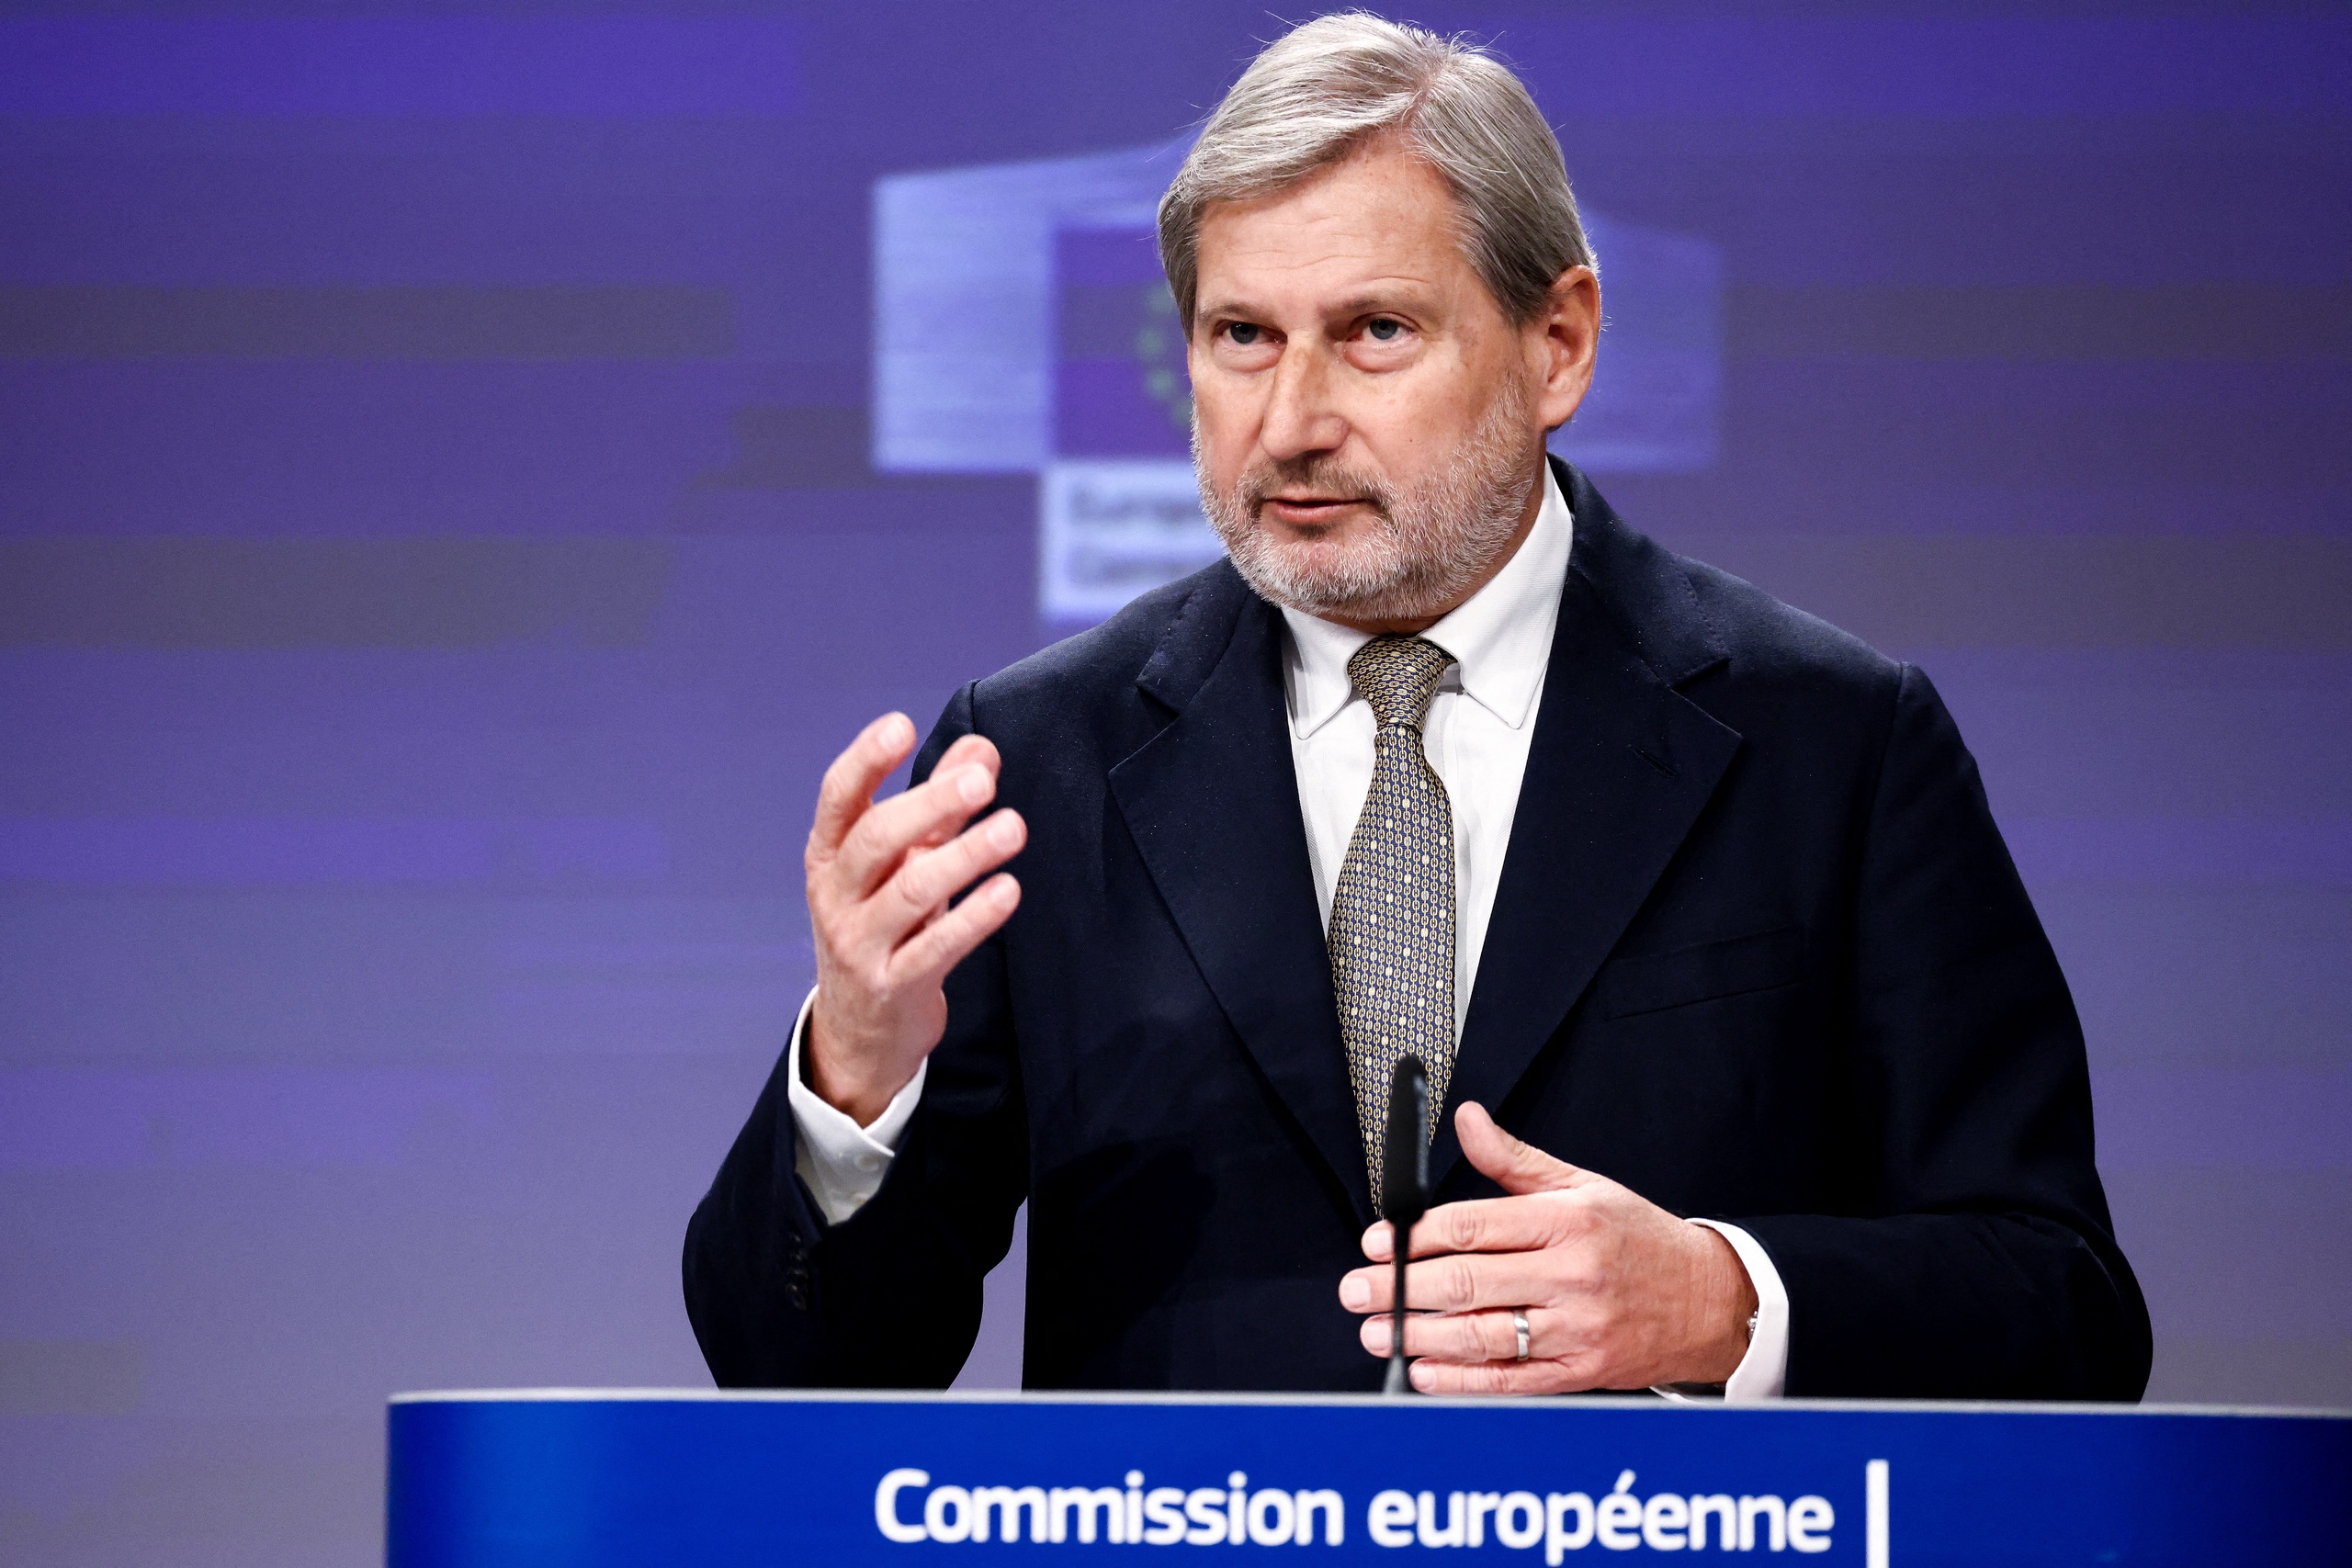 Hungary and the European Commission have all but agreed on the release of billions of euros in frozen EU subsidies for the country, said the European Commissioner responsible, Johannes Hahn.